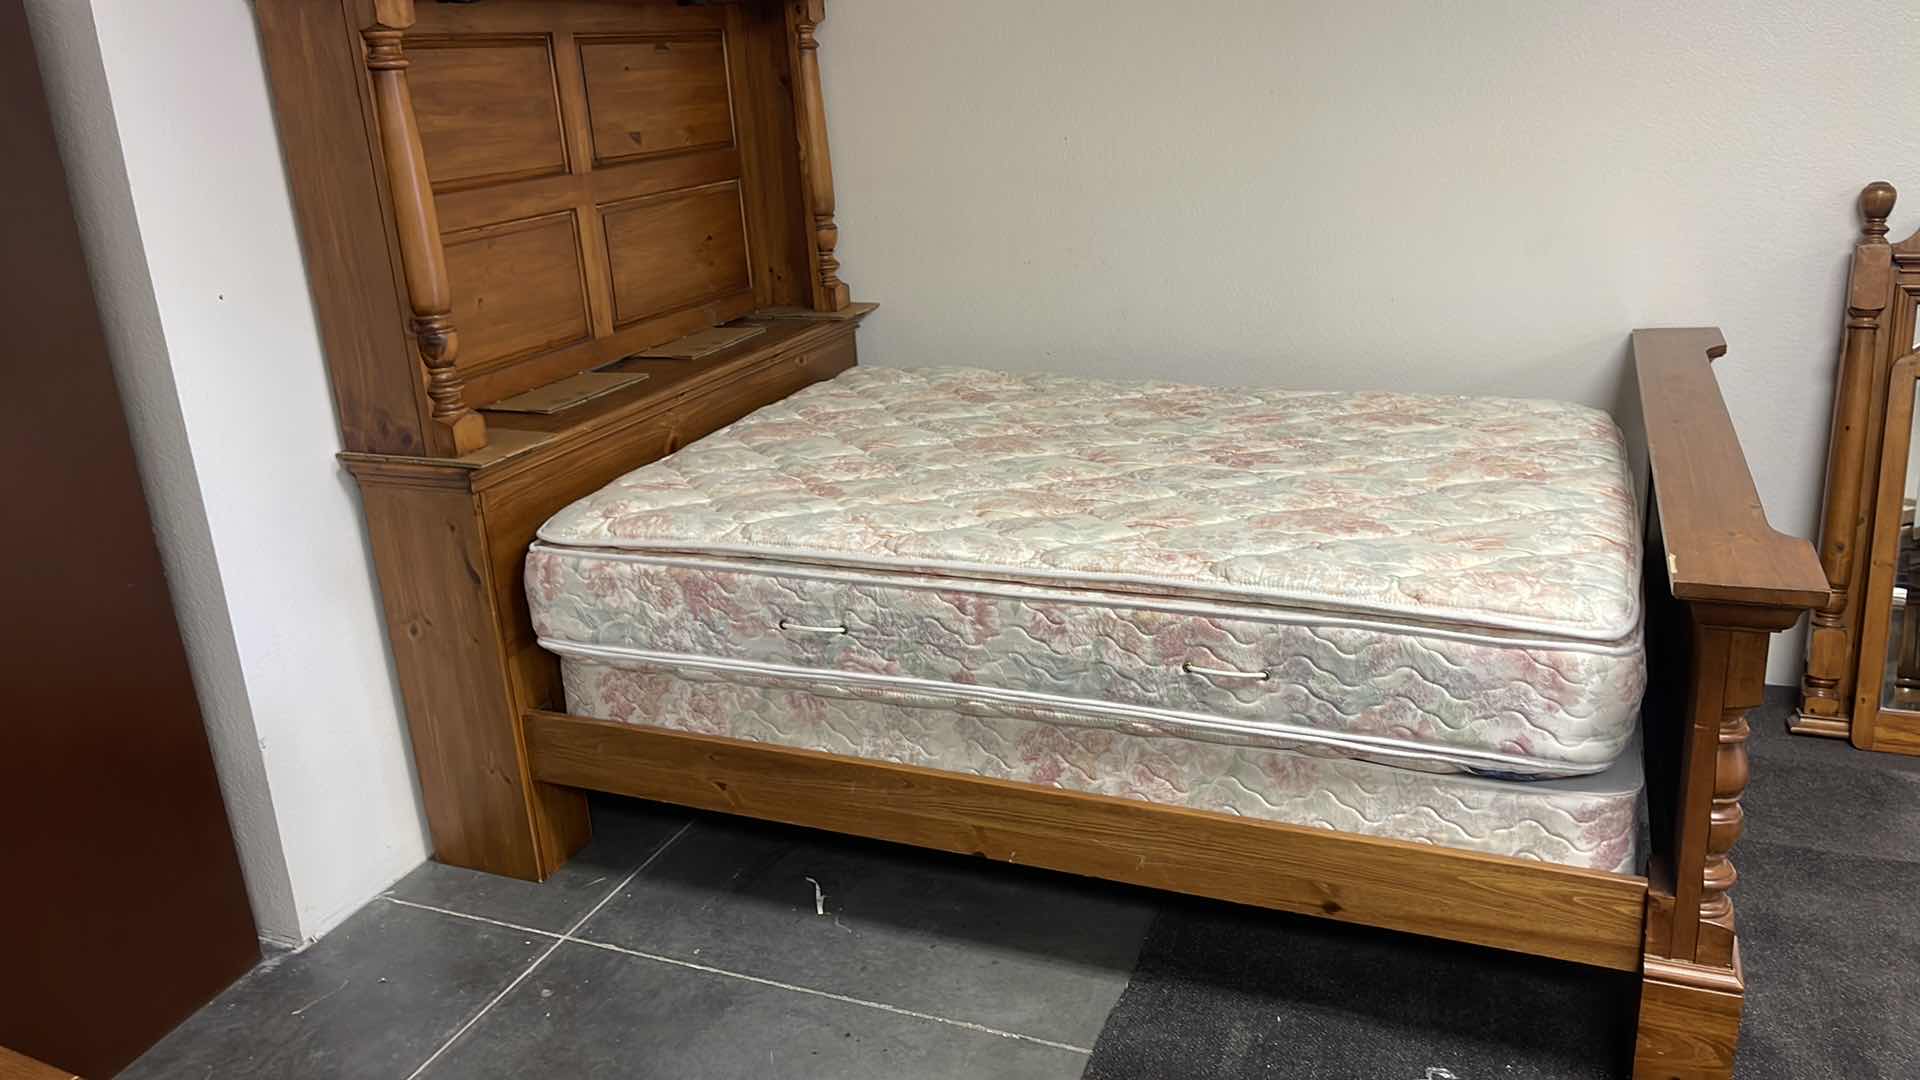 Photo 5 of KNOTTY WOOD FULL SIZE BED FRAME W LIGHTED HEADBOARD (MATTRESS SOLD SEPARATELY) 64” X 98” H79”